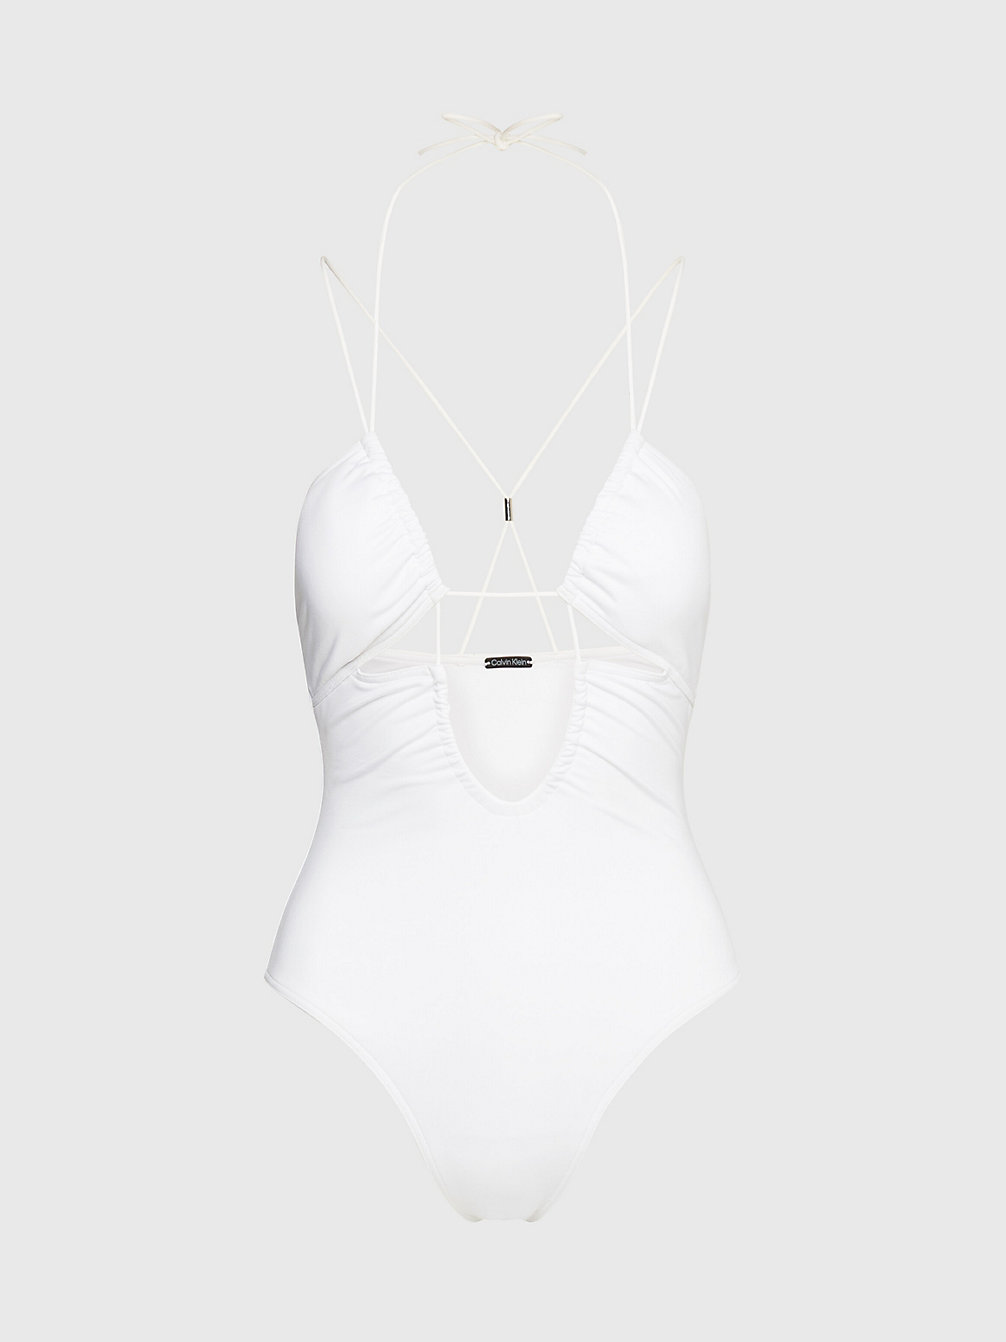 PVH CLASSIC WHITE Swimsuit - Multi Ties undefined women Calvin Klein